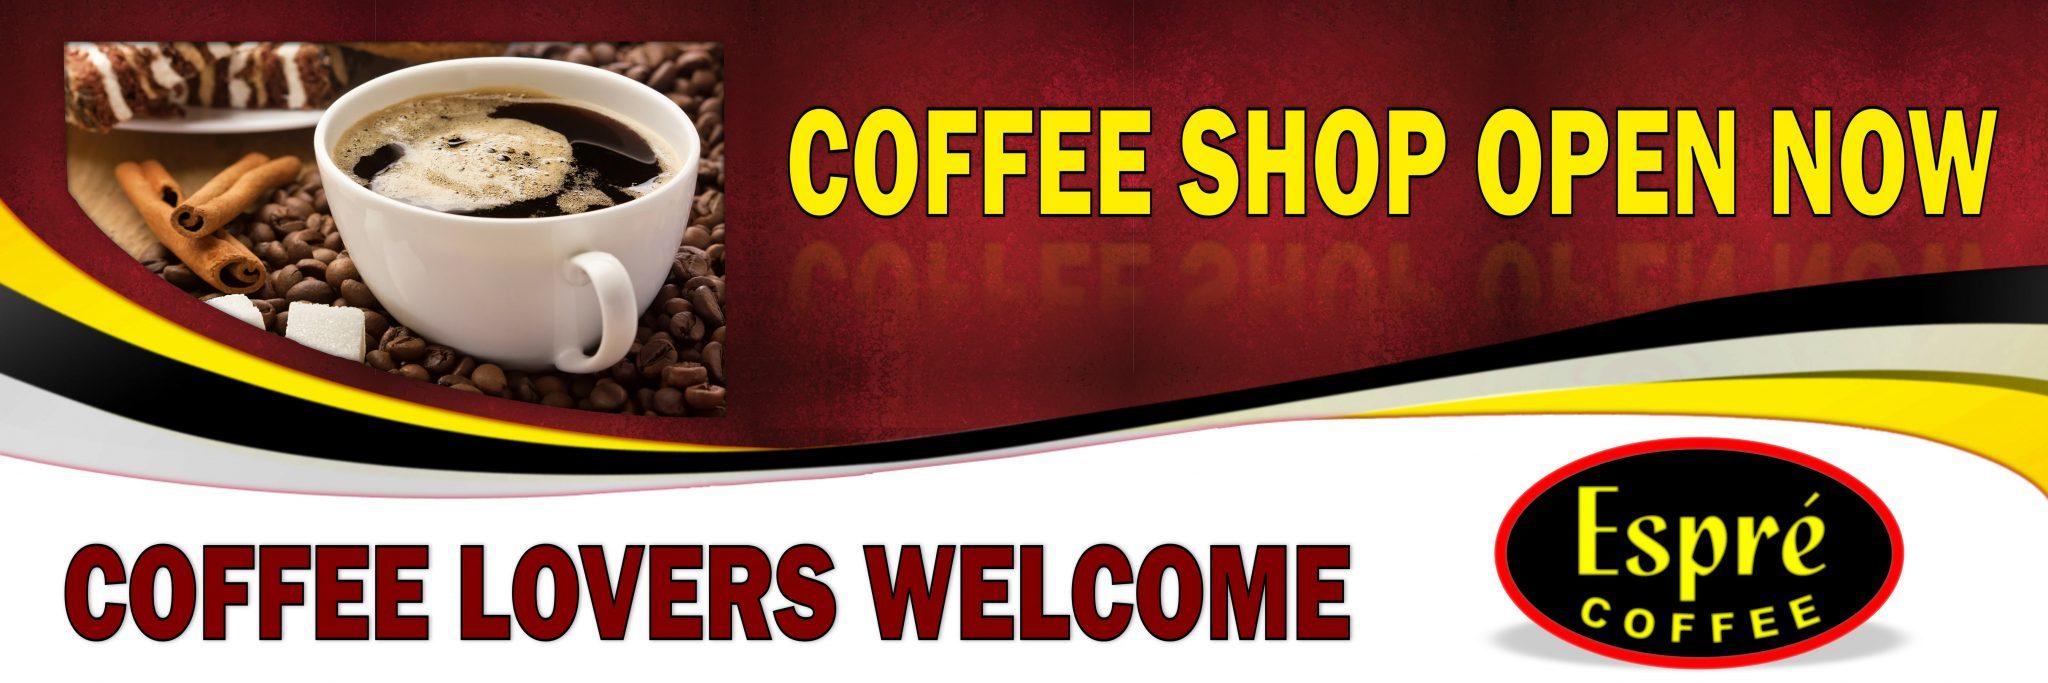 Coffee Shop Open Now